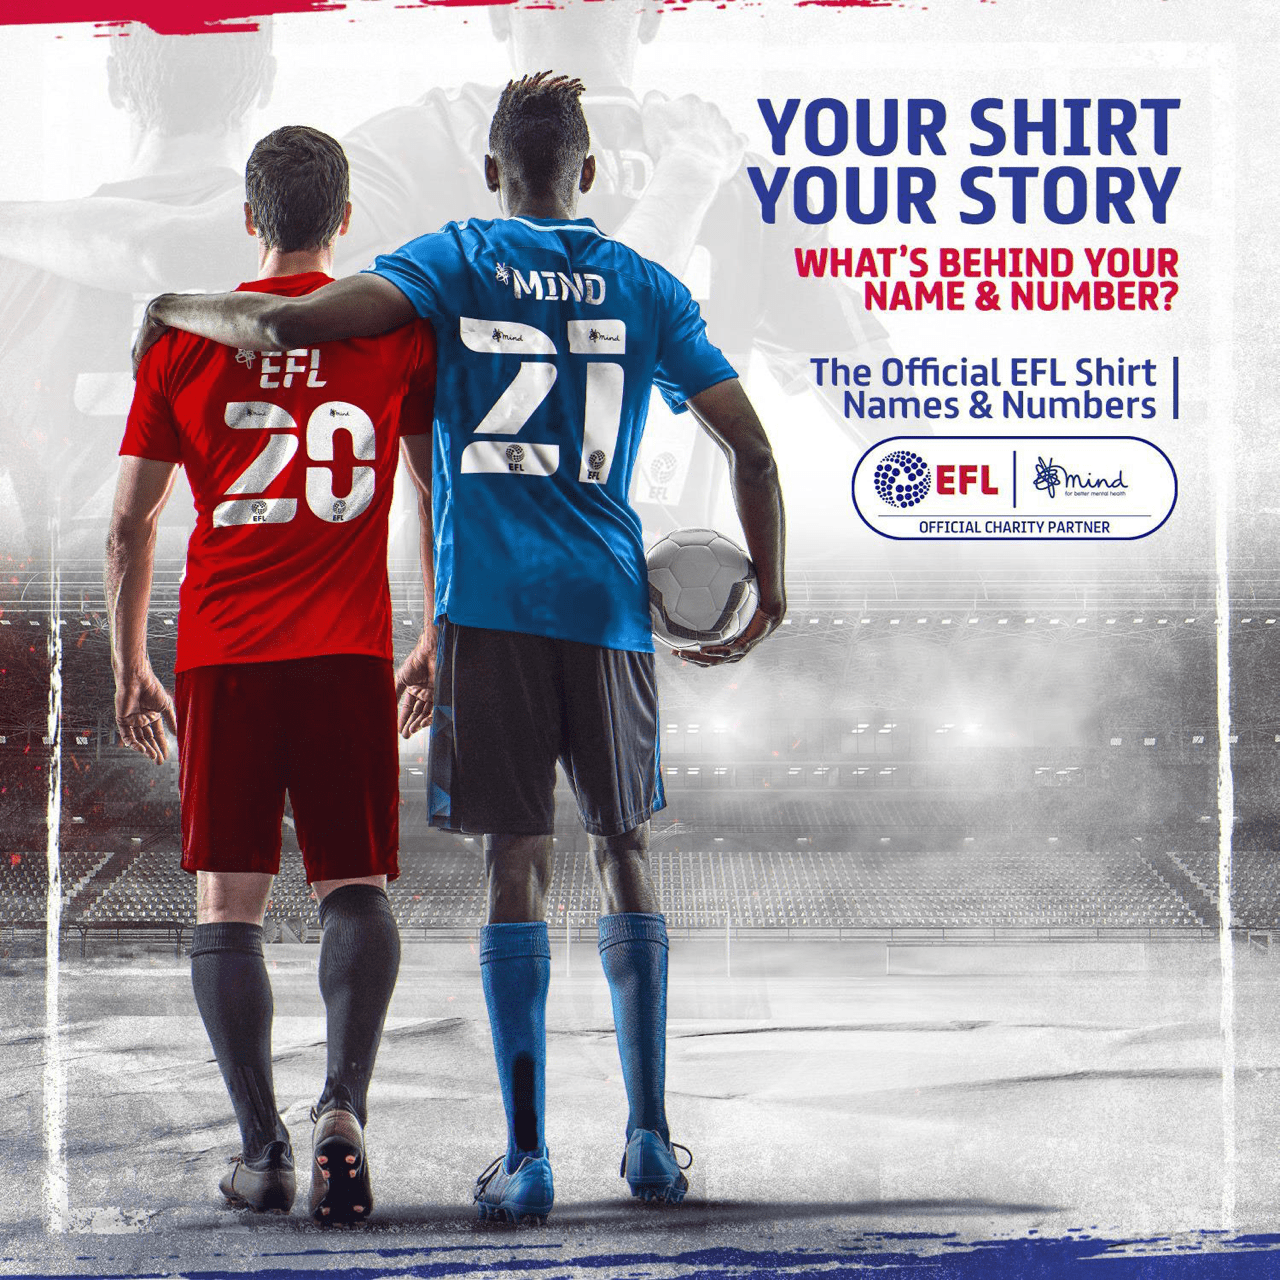 EFL and MIND Celebrate Two Seasons Of ‘on Your Side’ Partnership